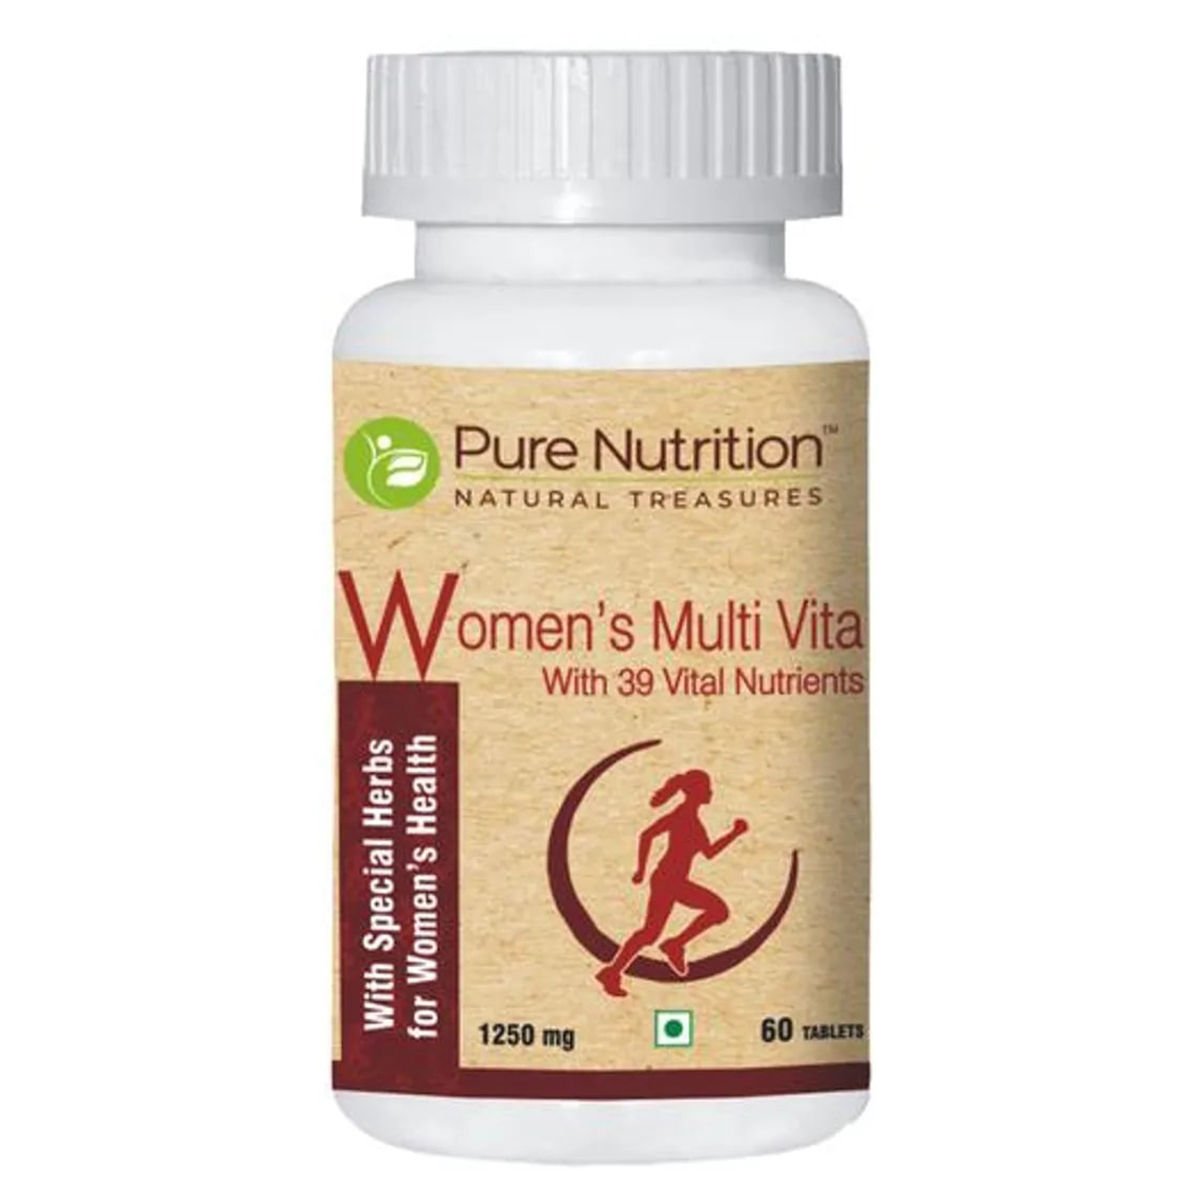 Buy Pure Nutrition Multivitamin for Women, 60 Tablets Online